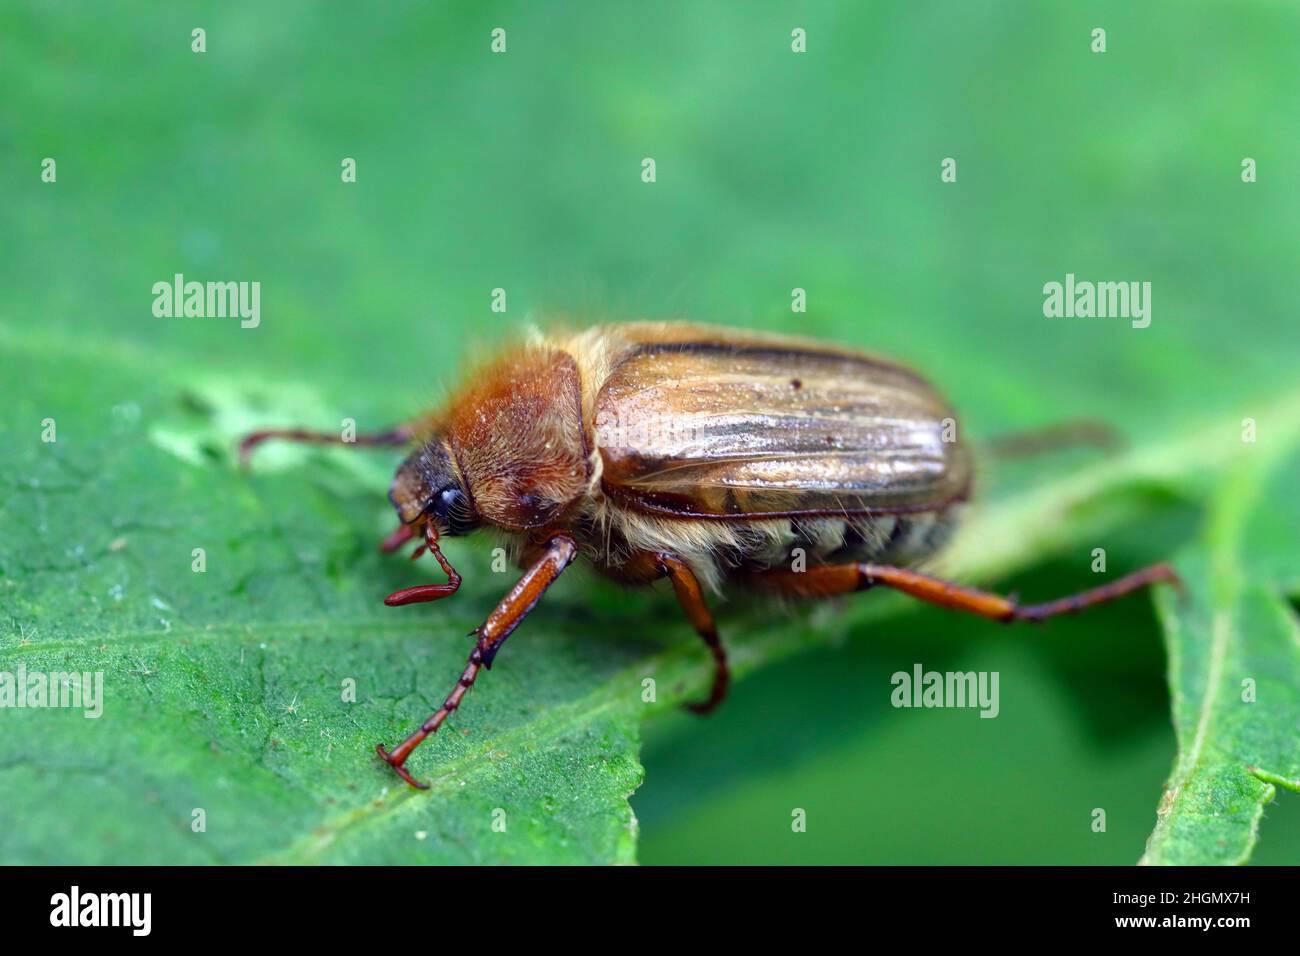 Small June Beetle Amphimallon solstitiale sitting on the damaged plant leaf. Stock Photo